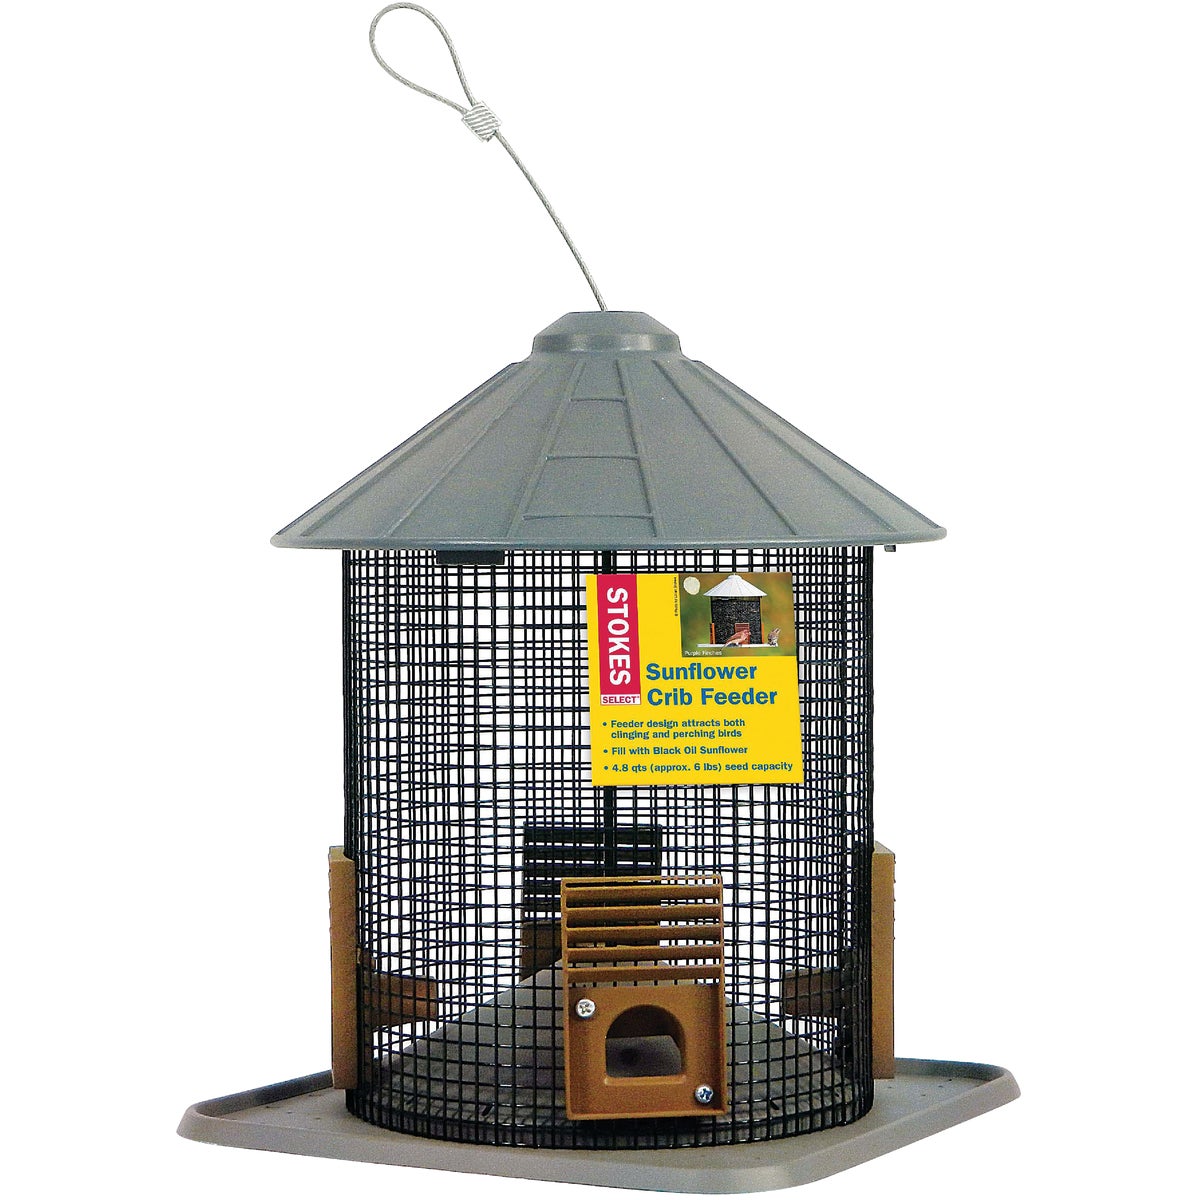 Item 701912, Feeder design attracts both clinging and perching birds.